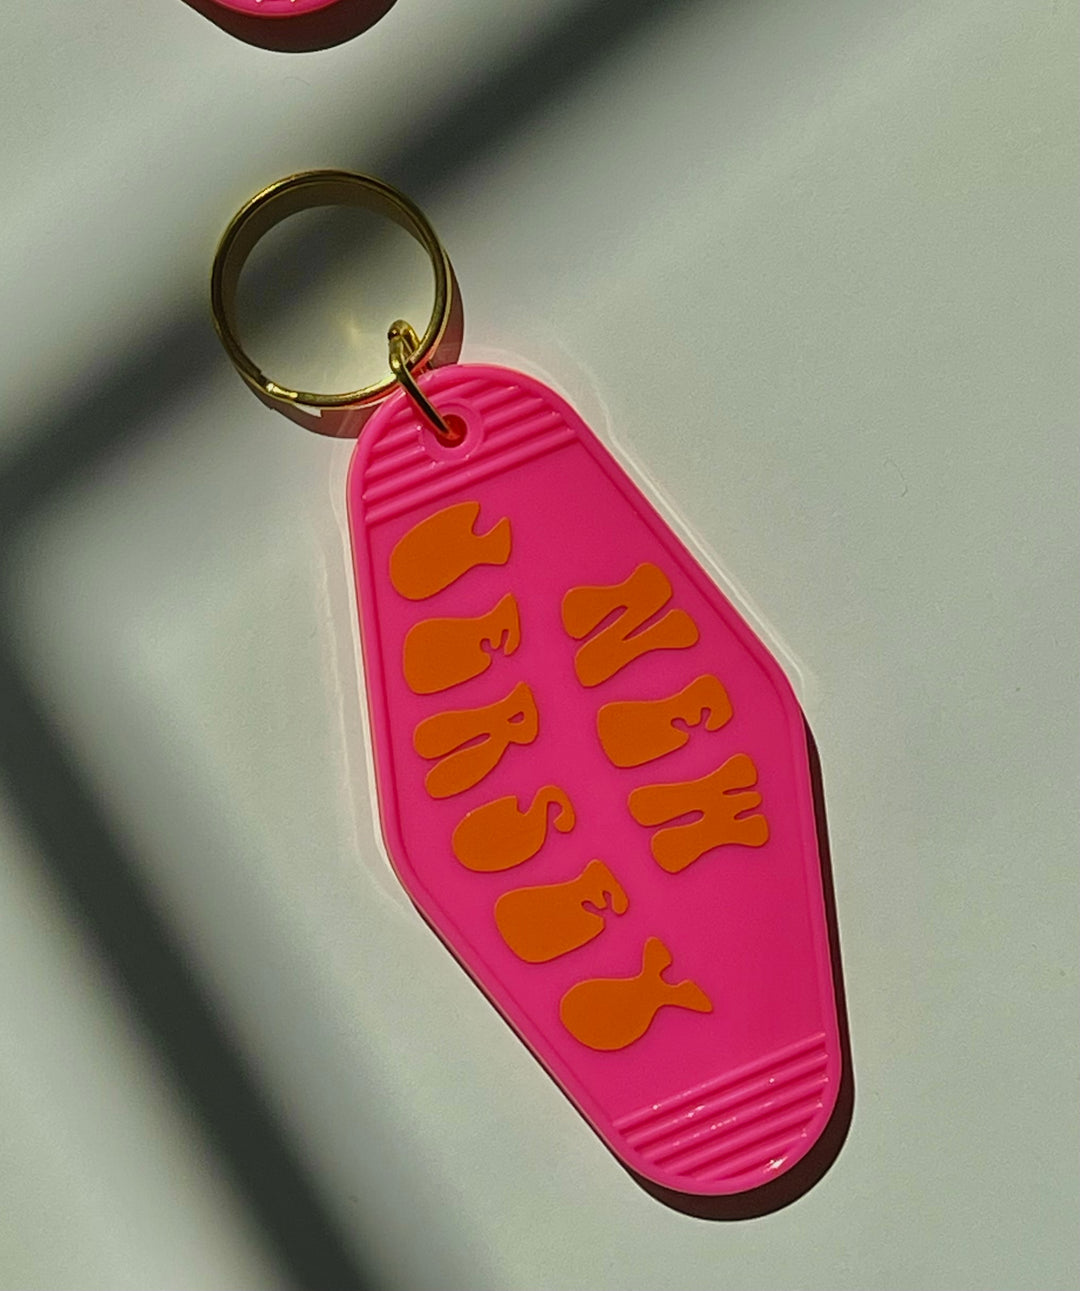 The Vintage Vibes Keychain